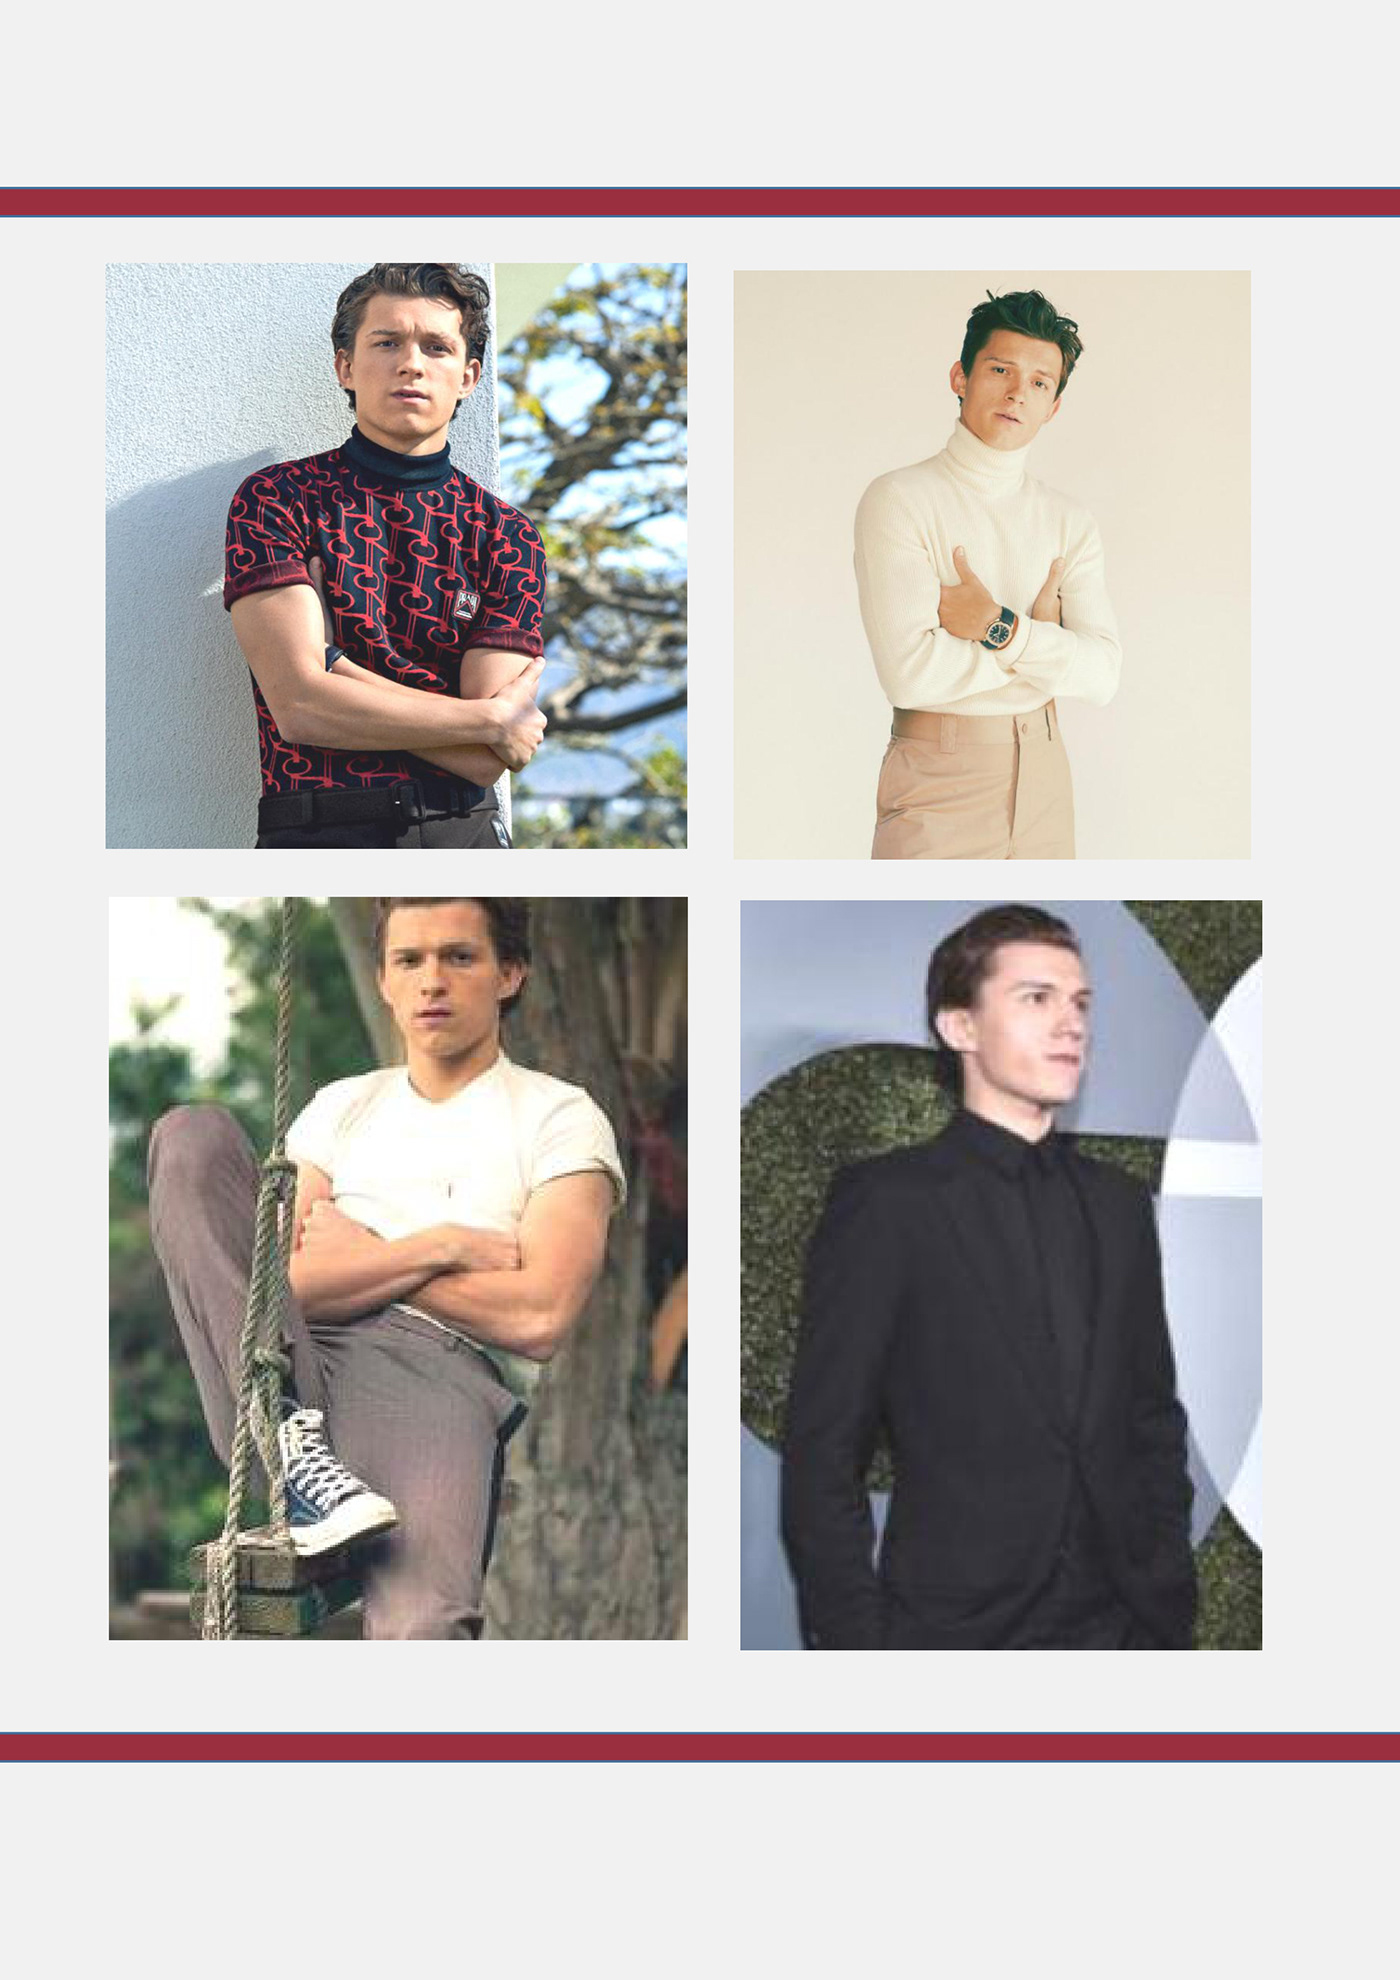 tom holland Style client board client profile styling  Apparel Design fashion design Clothing Fashion 